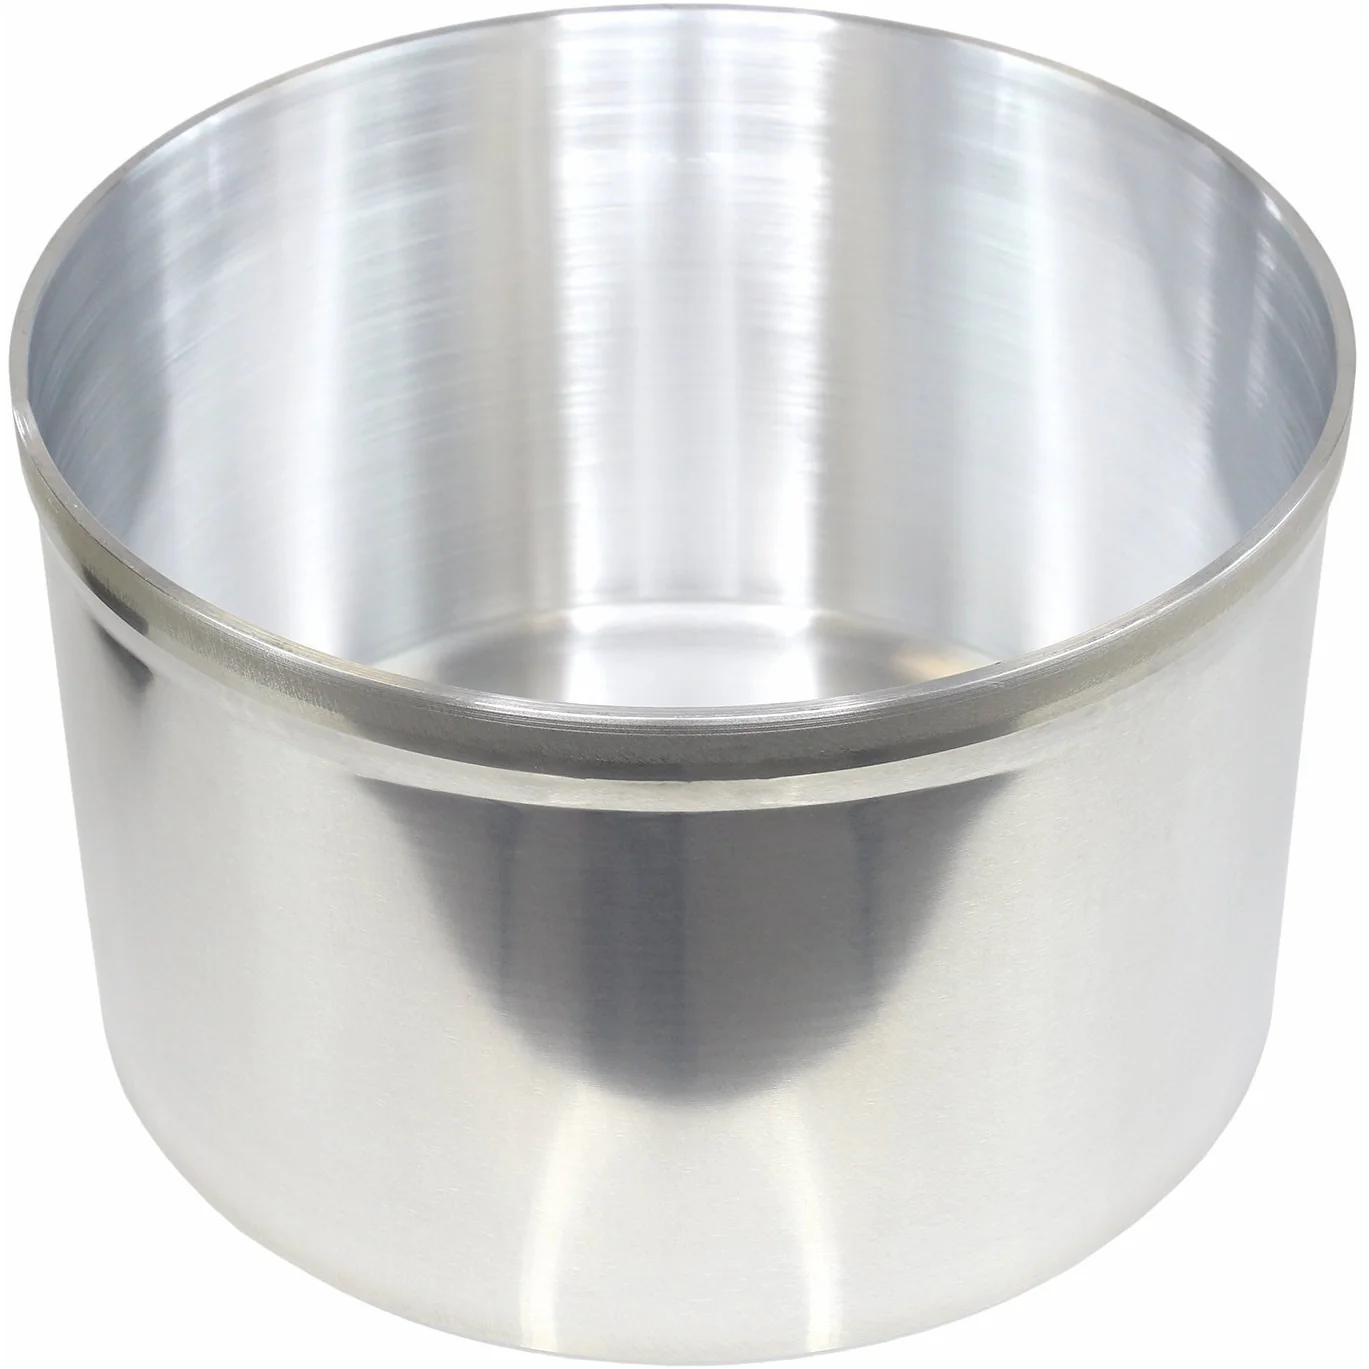 Do your aluminum vacuum chambers have a flat bottom or are they cambered?